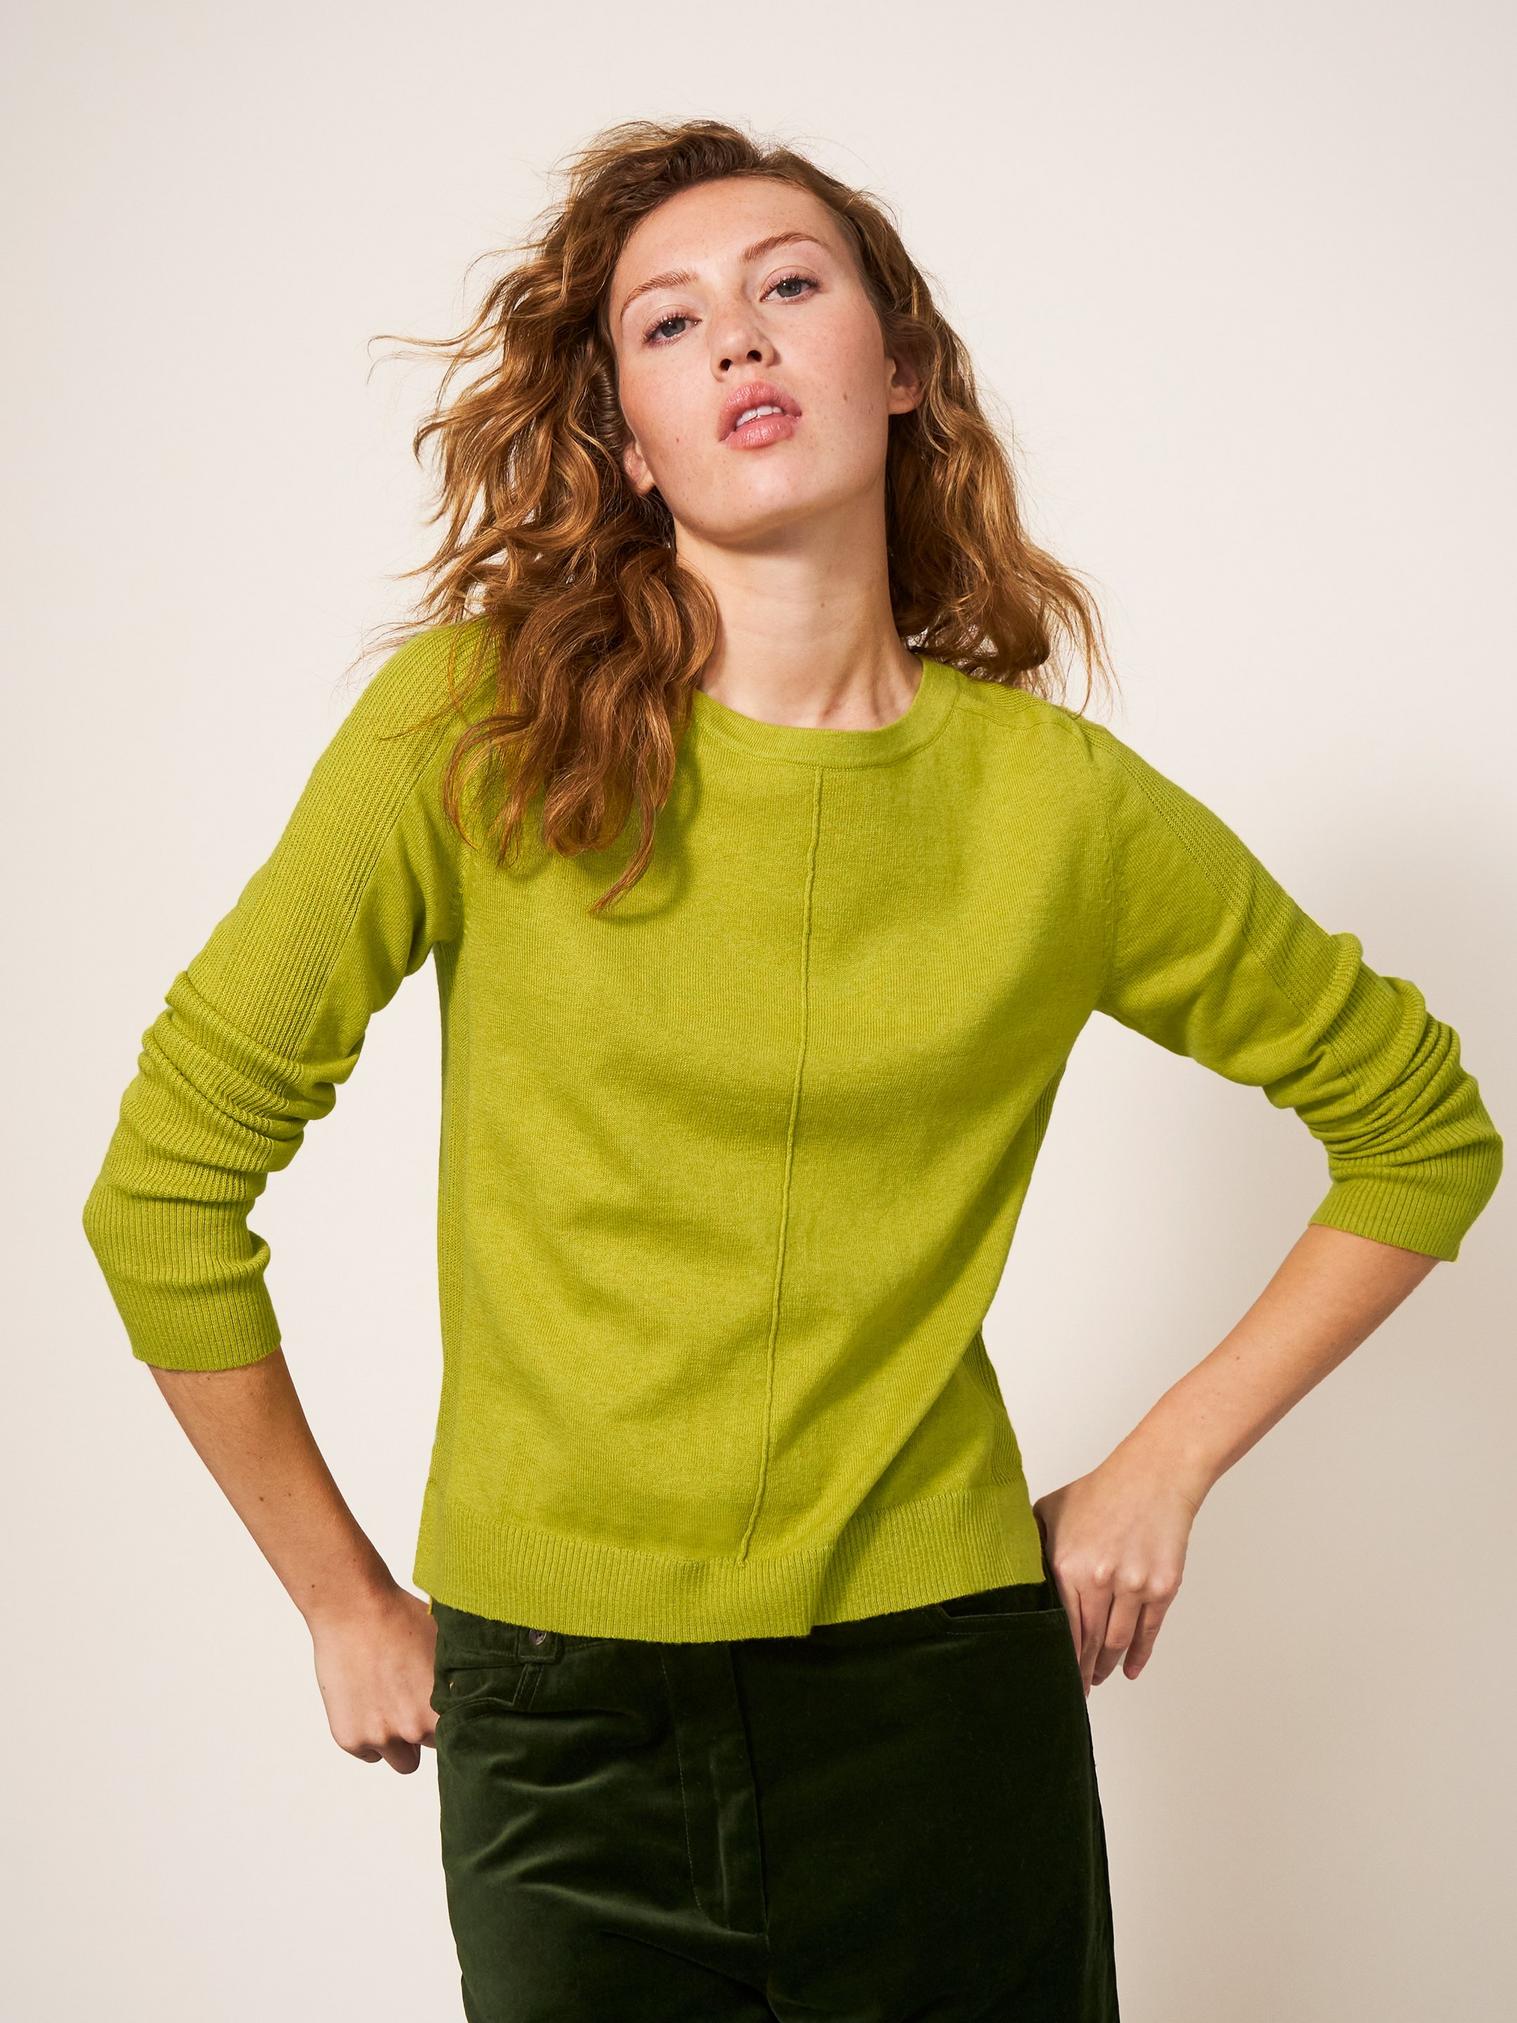 URBAN JUMPER in MID YELLOW - LIFESTYLE